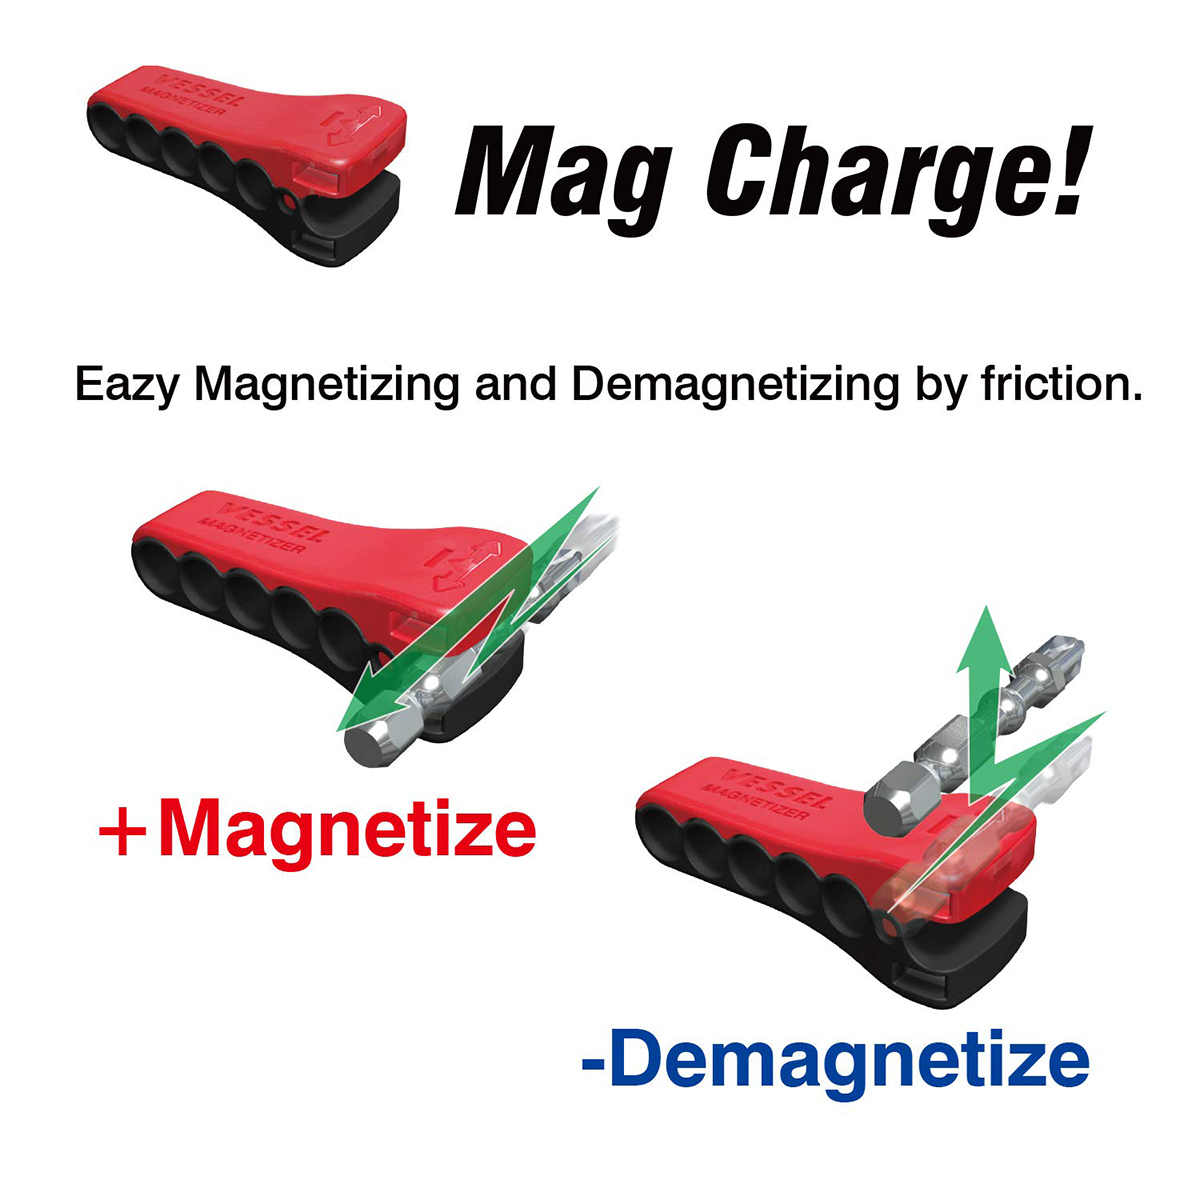 Easy Magnetizing and Demagnetizing by friction